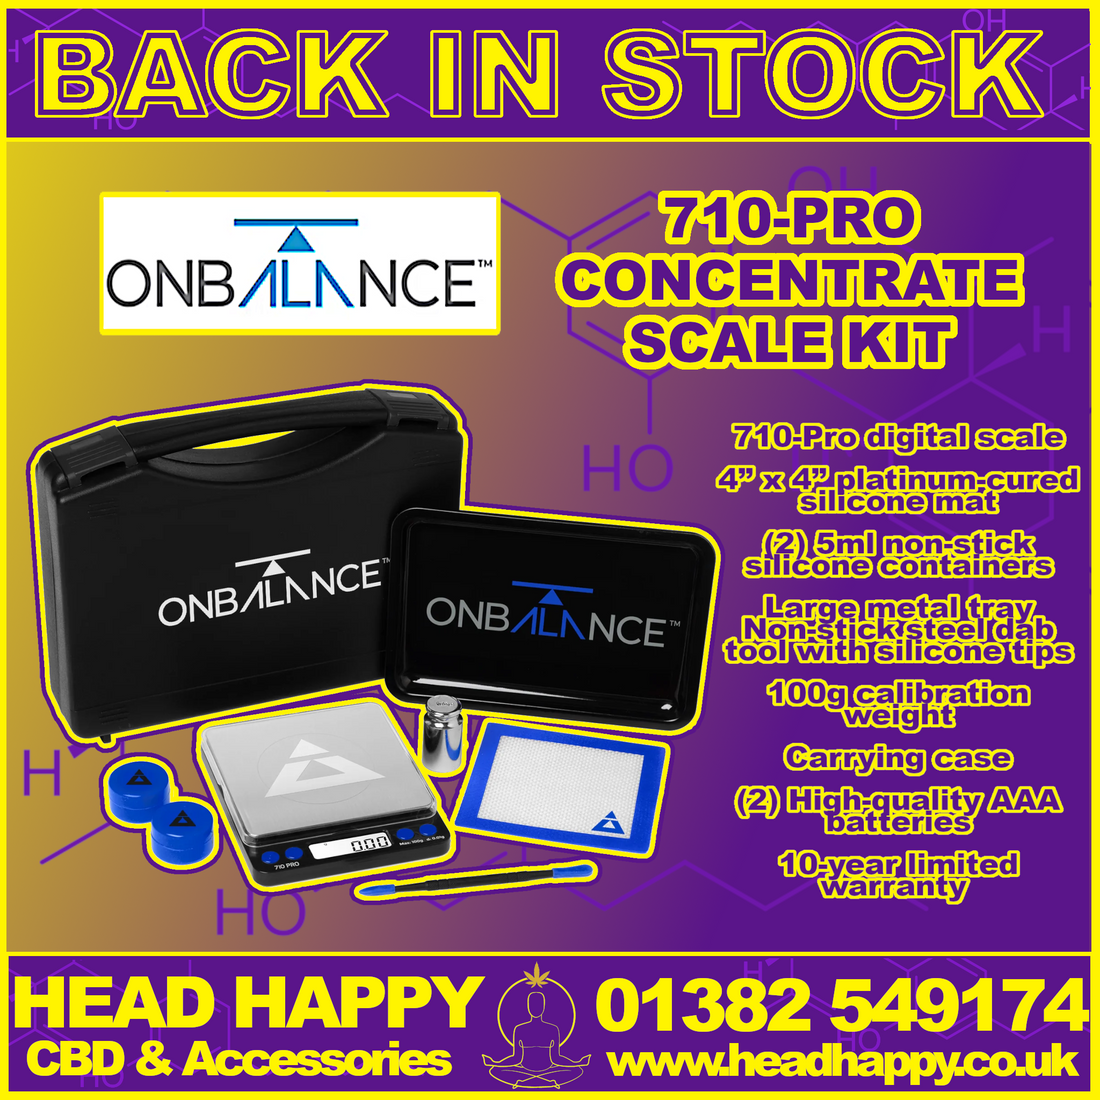 Back in stock - The ON BALANCE 710-PRO CONCENTRATE SCALE KIT